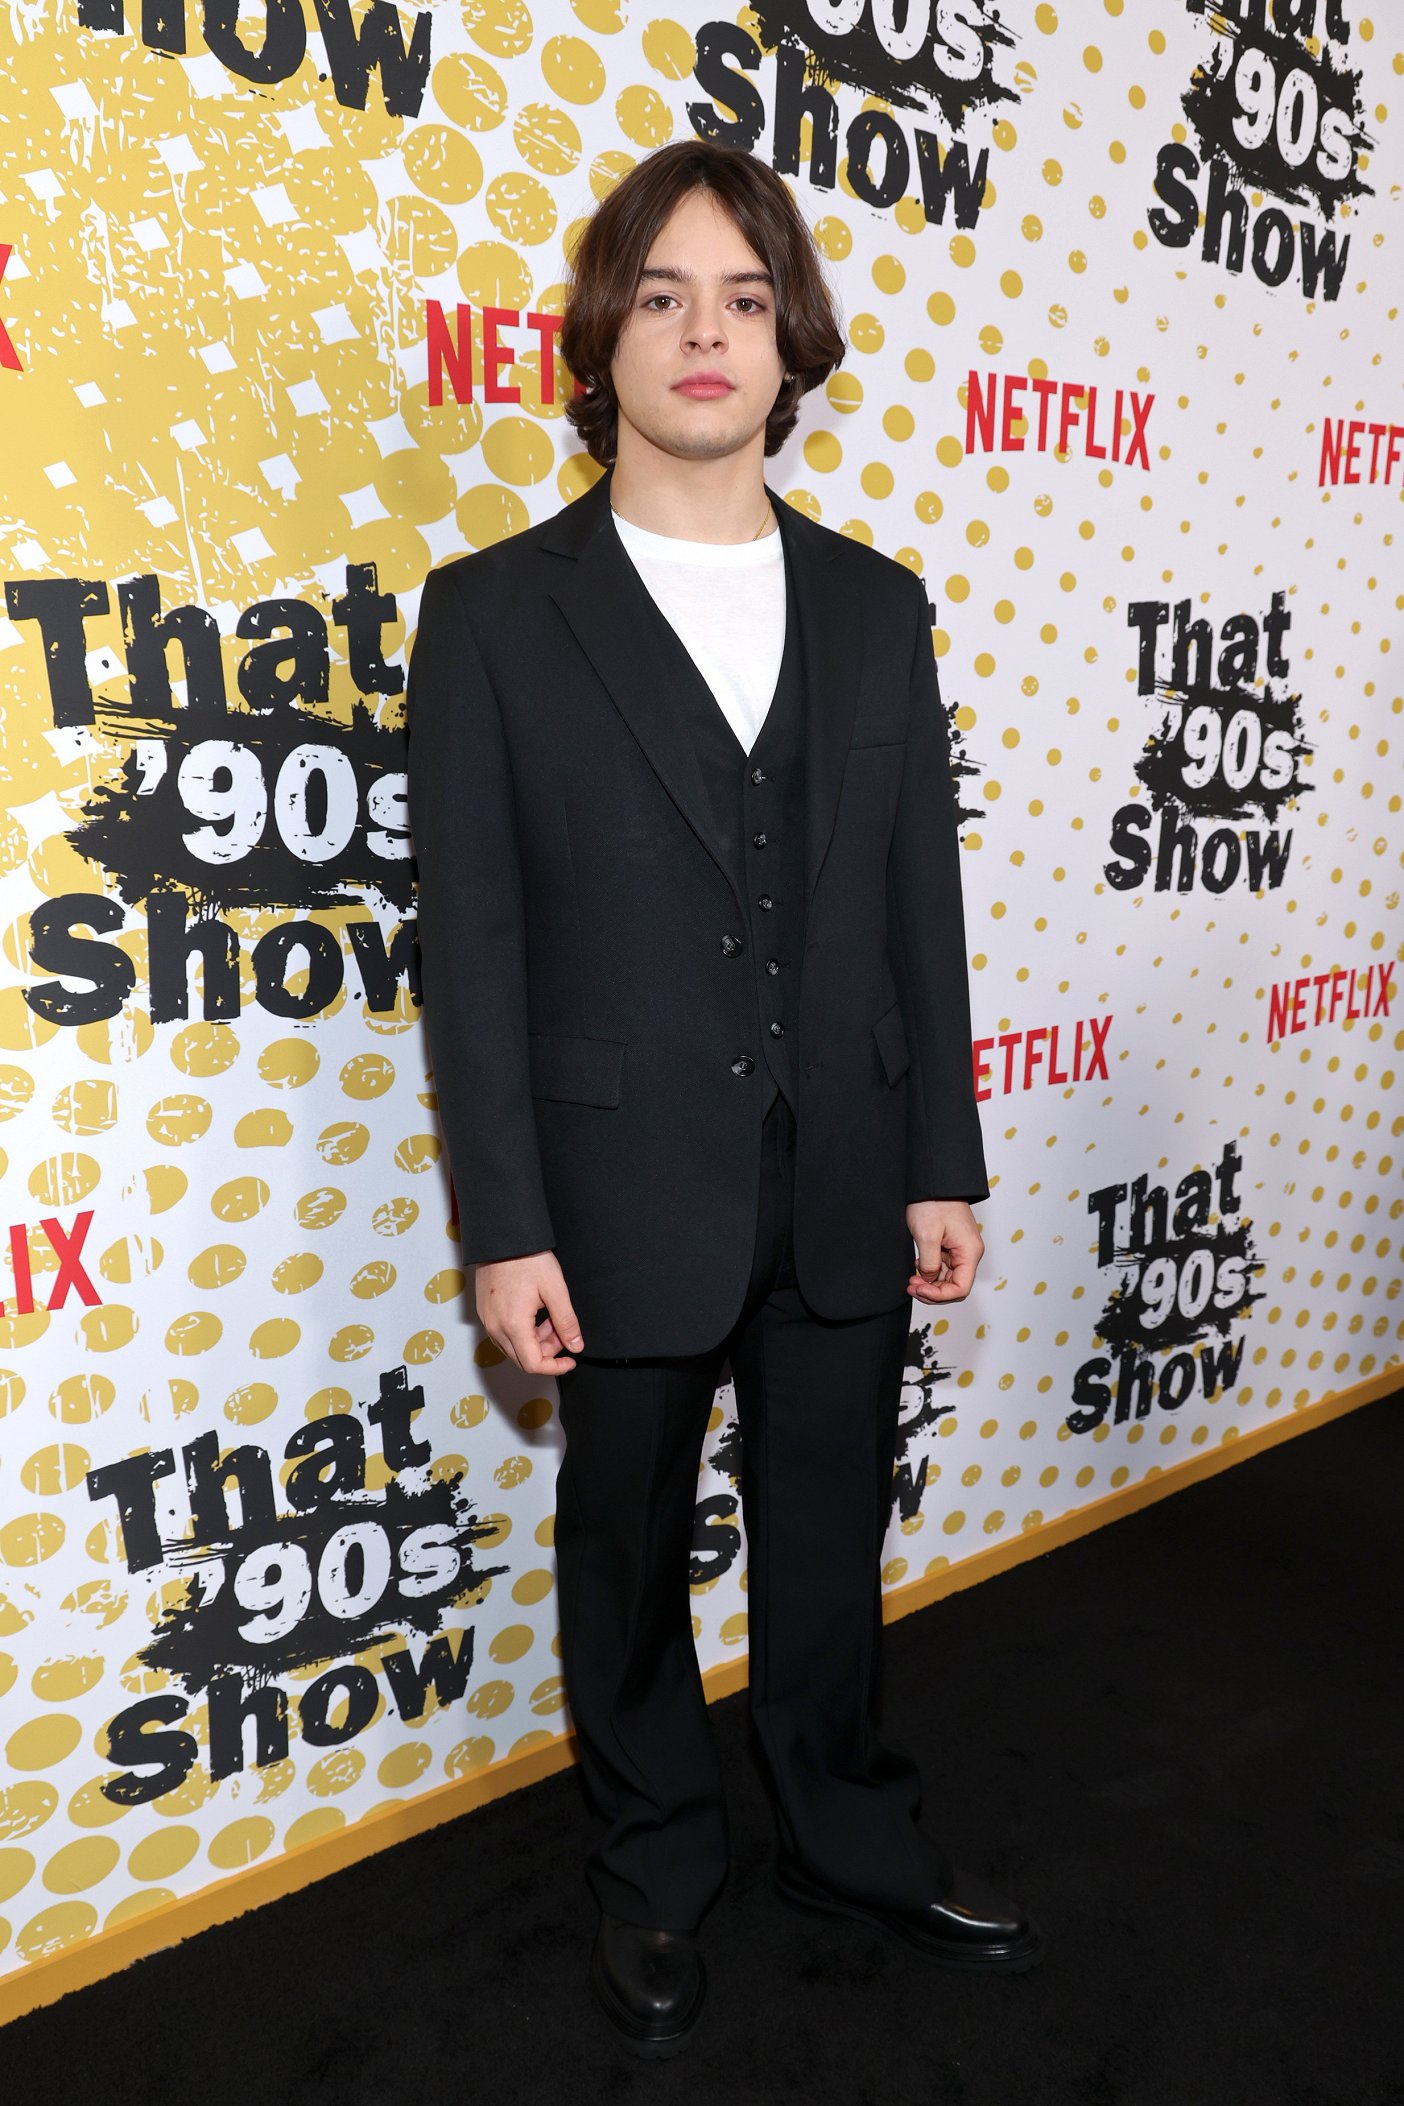 That 90's Show S1 premiere at Netflix Tudum Theater on January 12, 2023 in Los Angeles, California - Mace Coronel